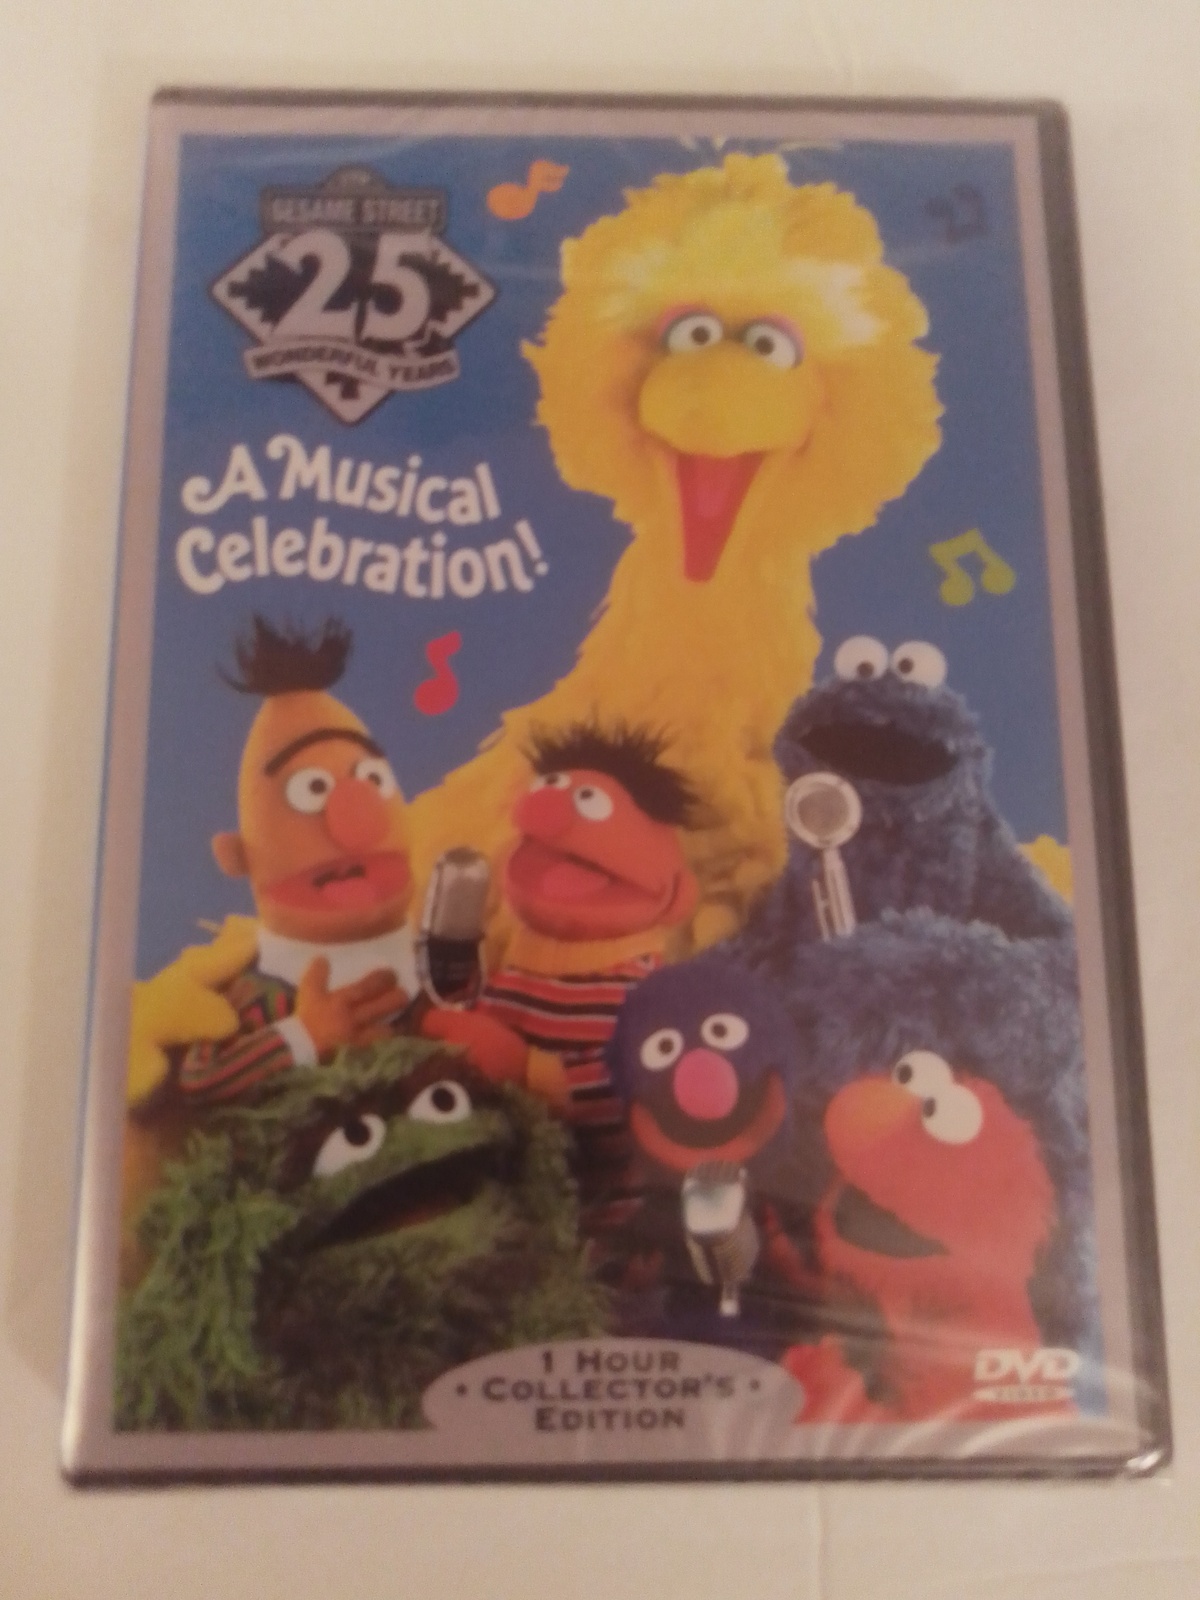 Primary image for Sesame Street 25 Wonderful Years A Musical Celebration DVD 1 Hour Collector Ed